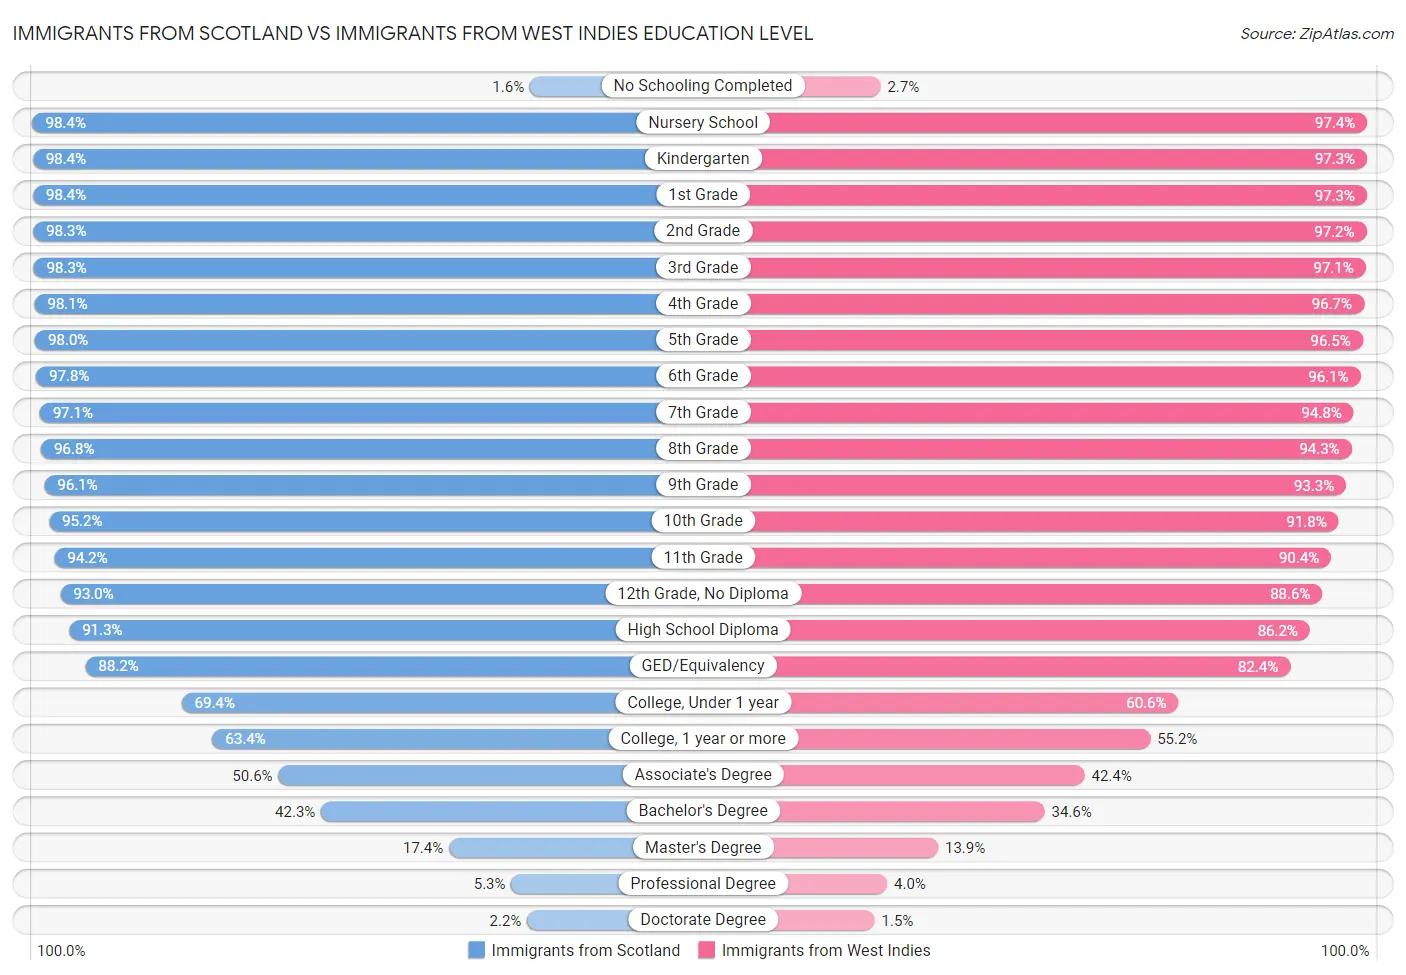 Immigrants from Scotland vs Immigrants from West Indies Education Level